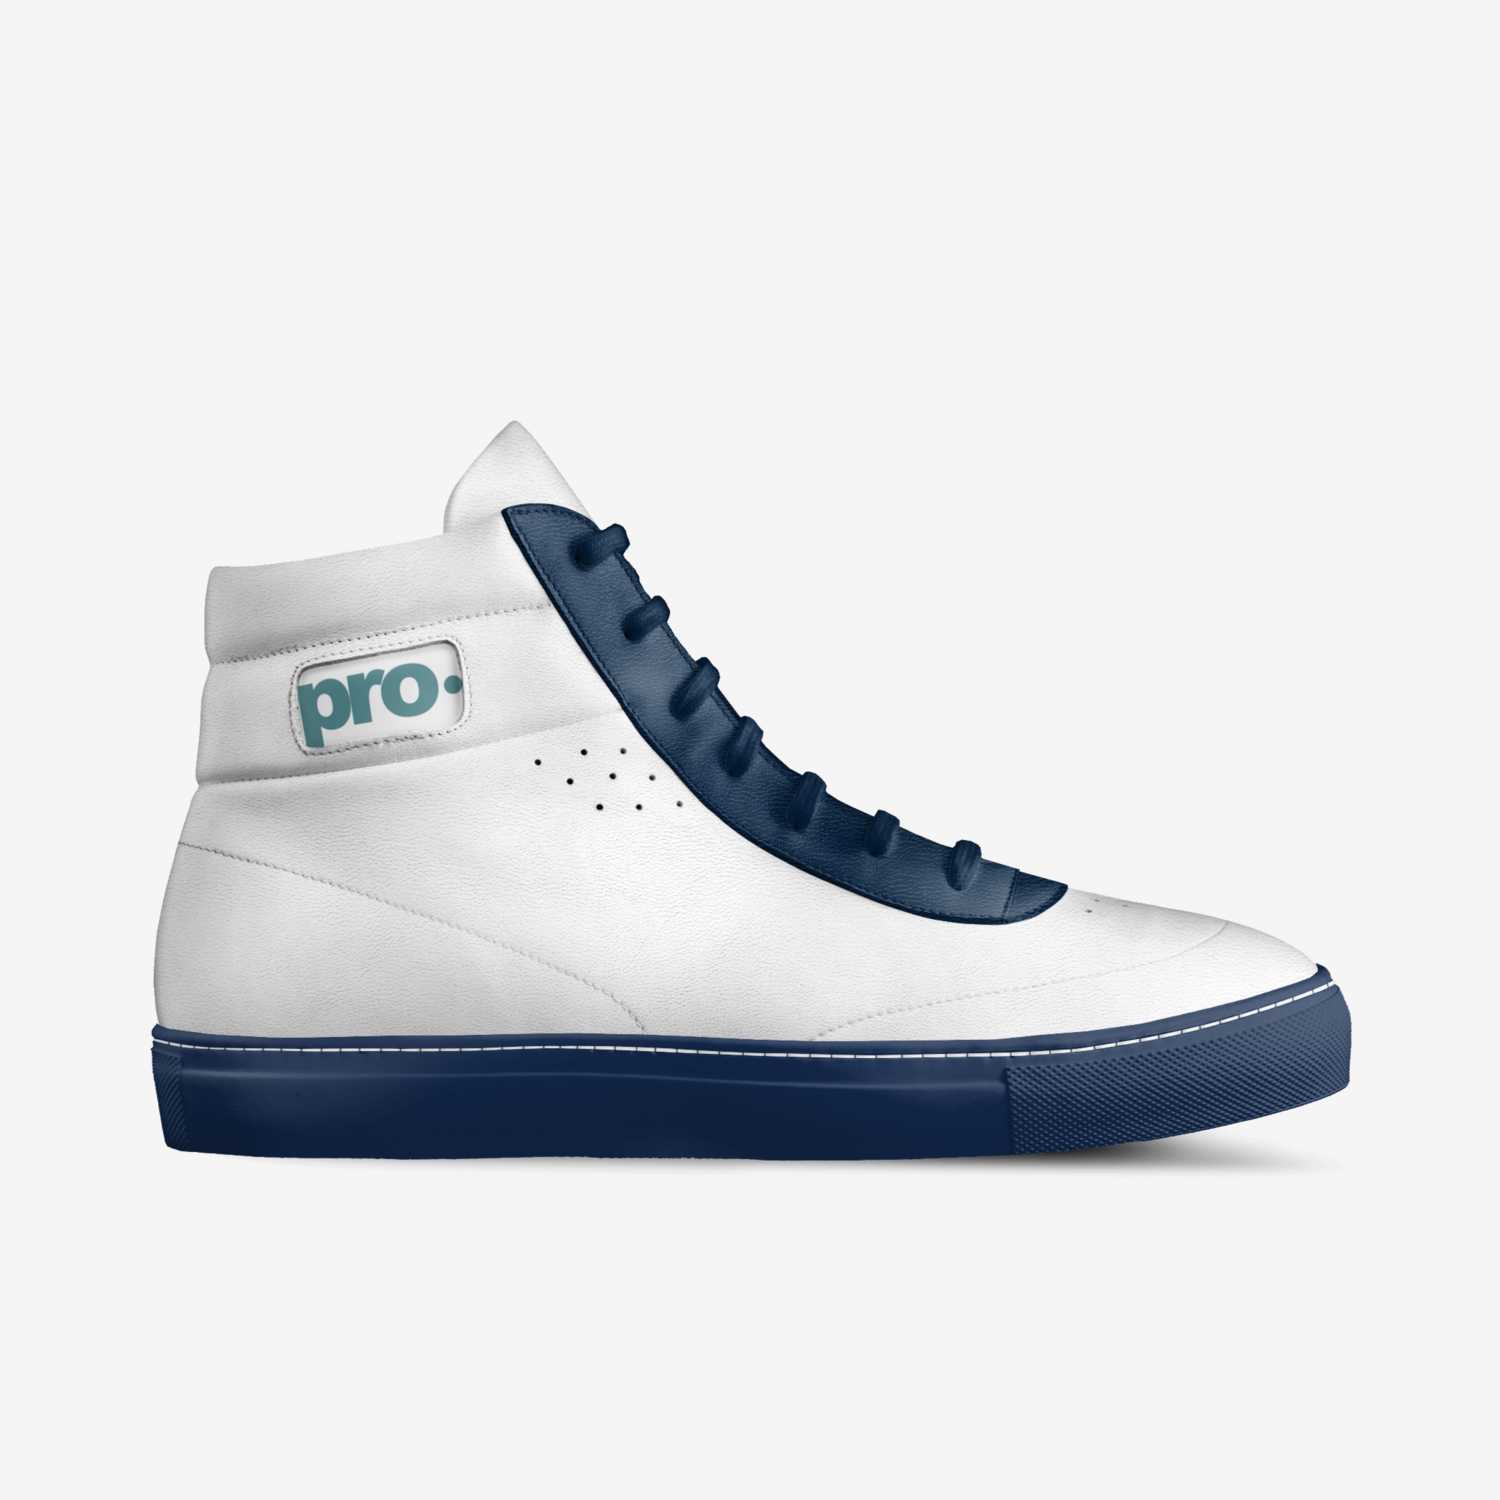 pro custom made in Italy shoes by Mark John | Side view